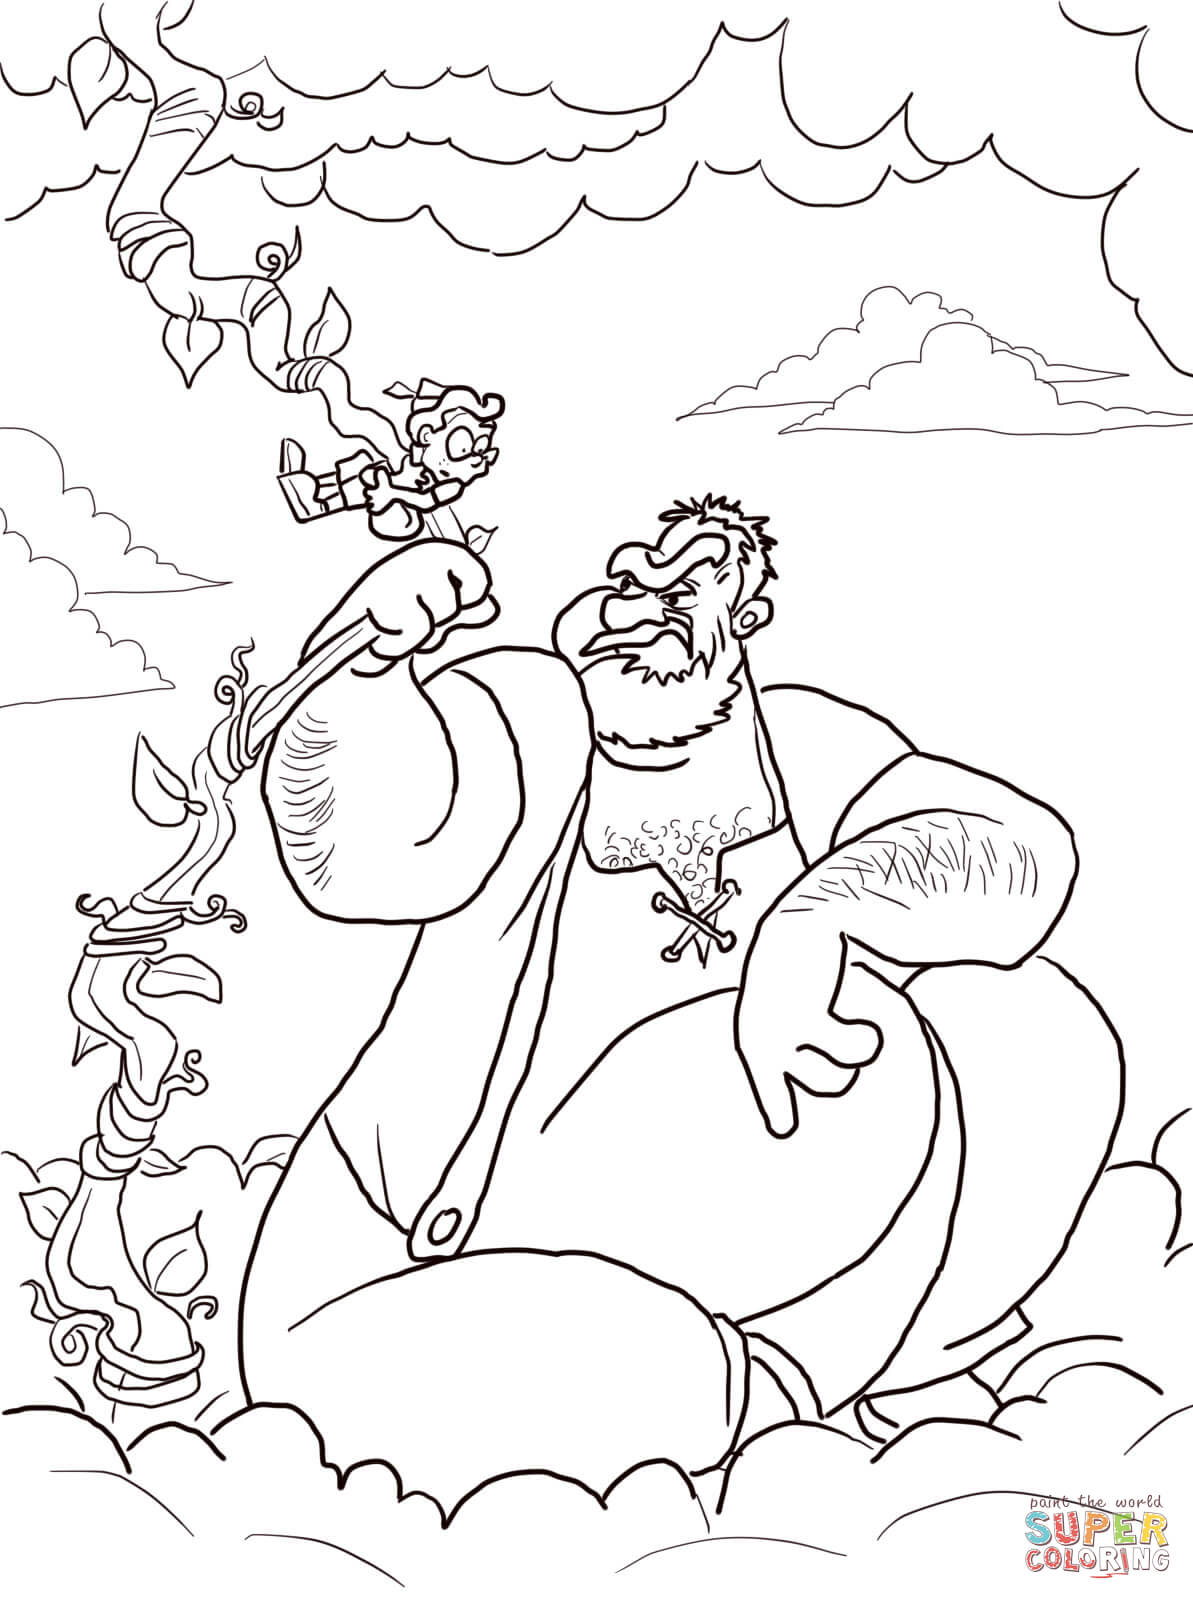 Jack and the Beanstalk Giant coloring page | Free Printable ...